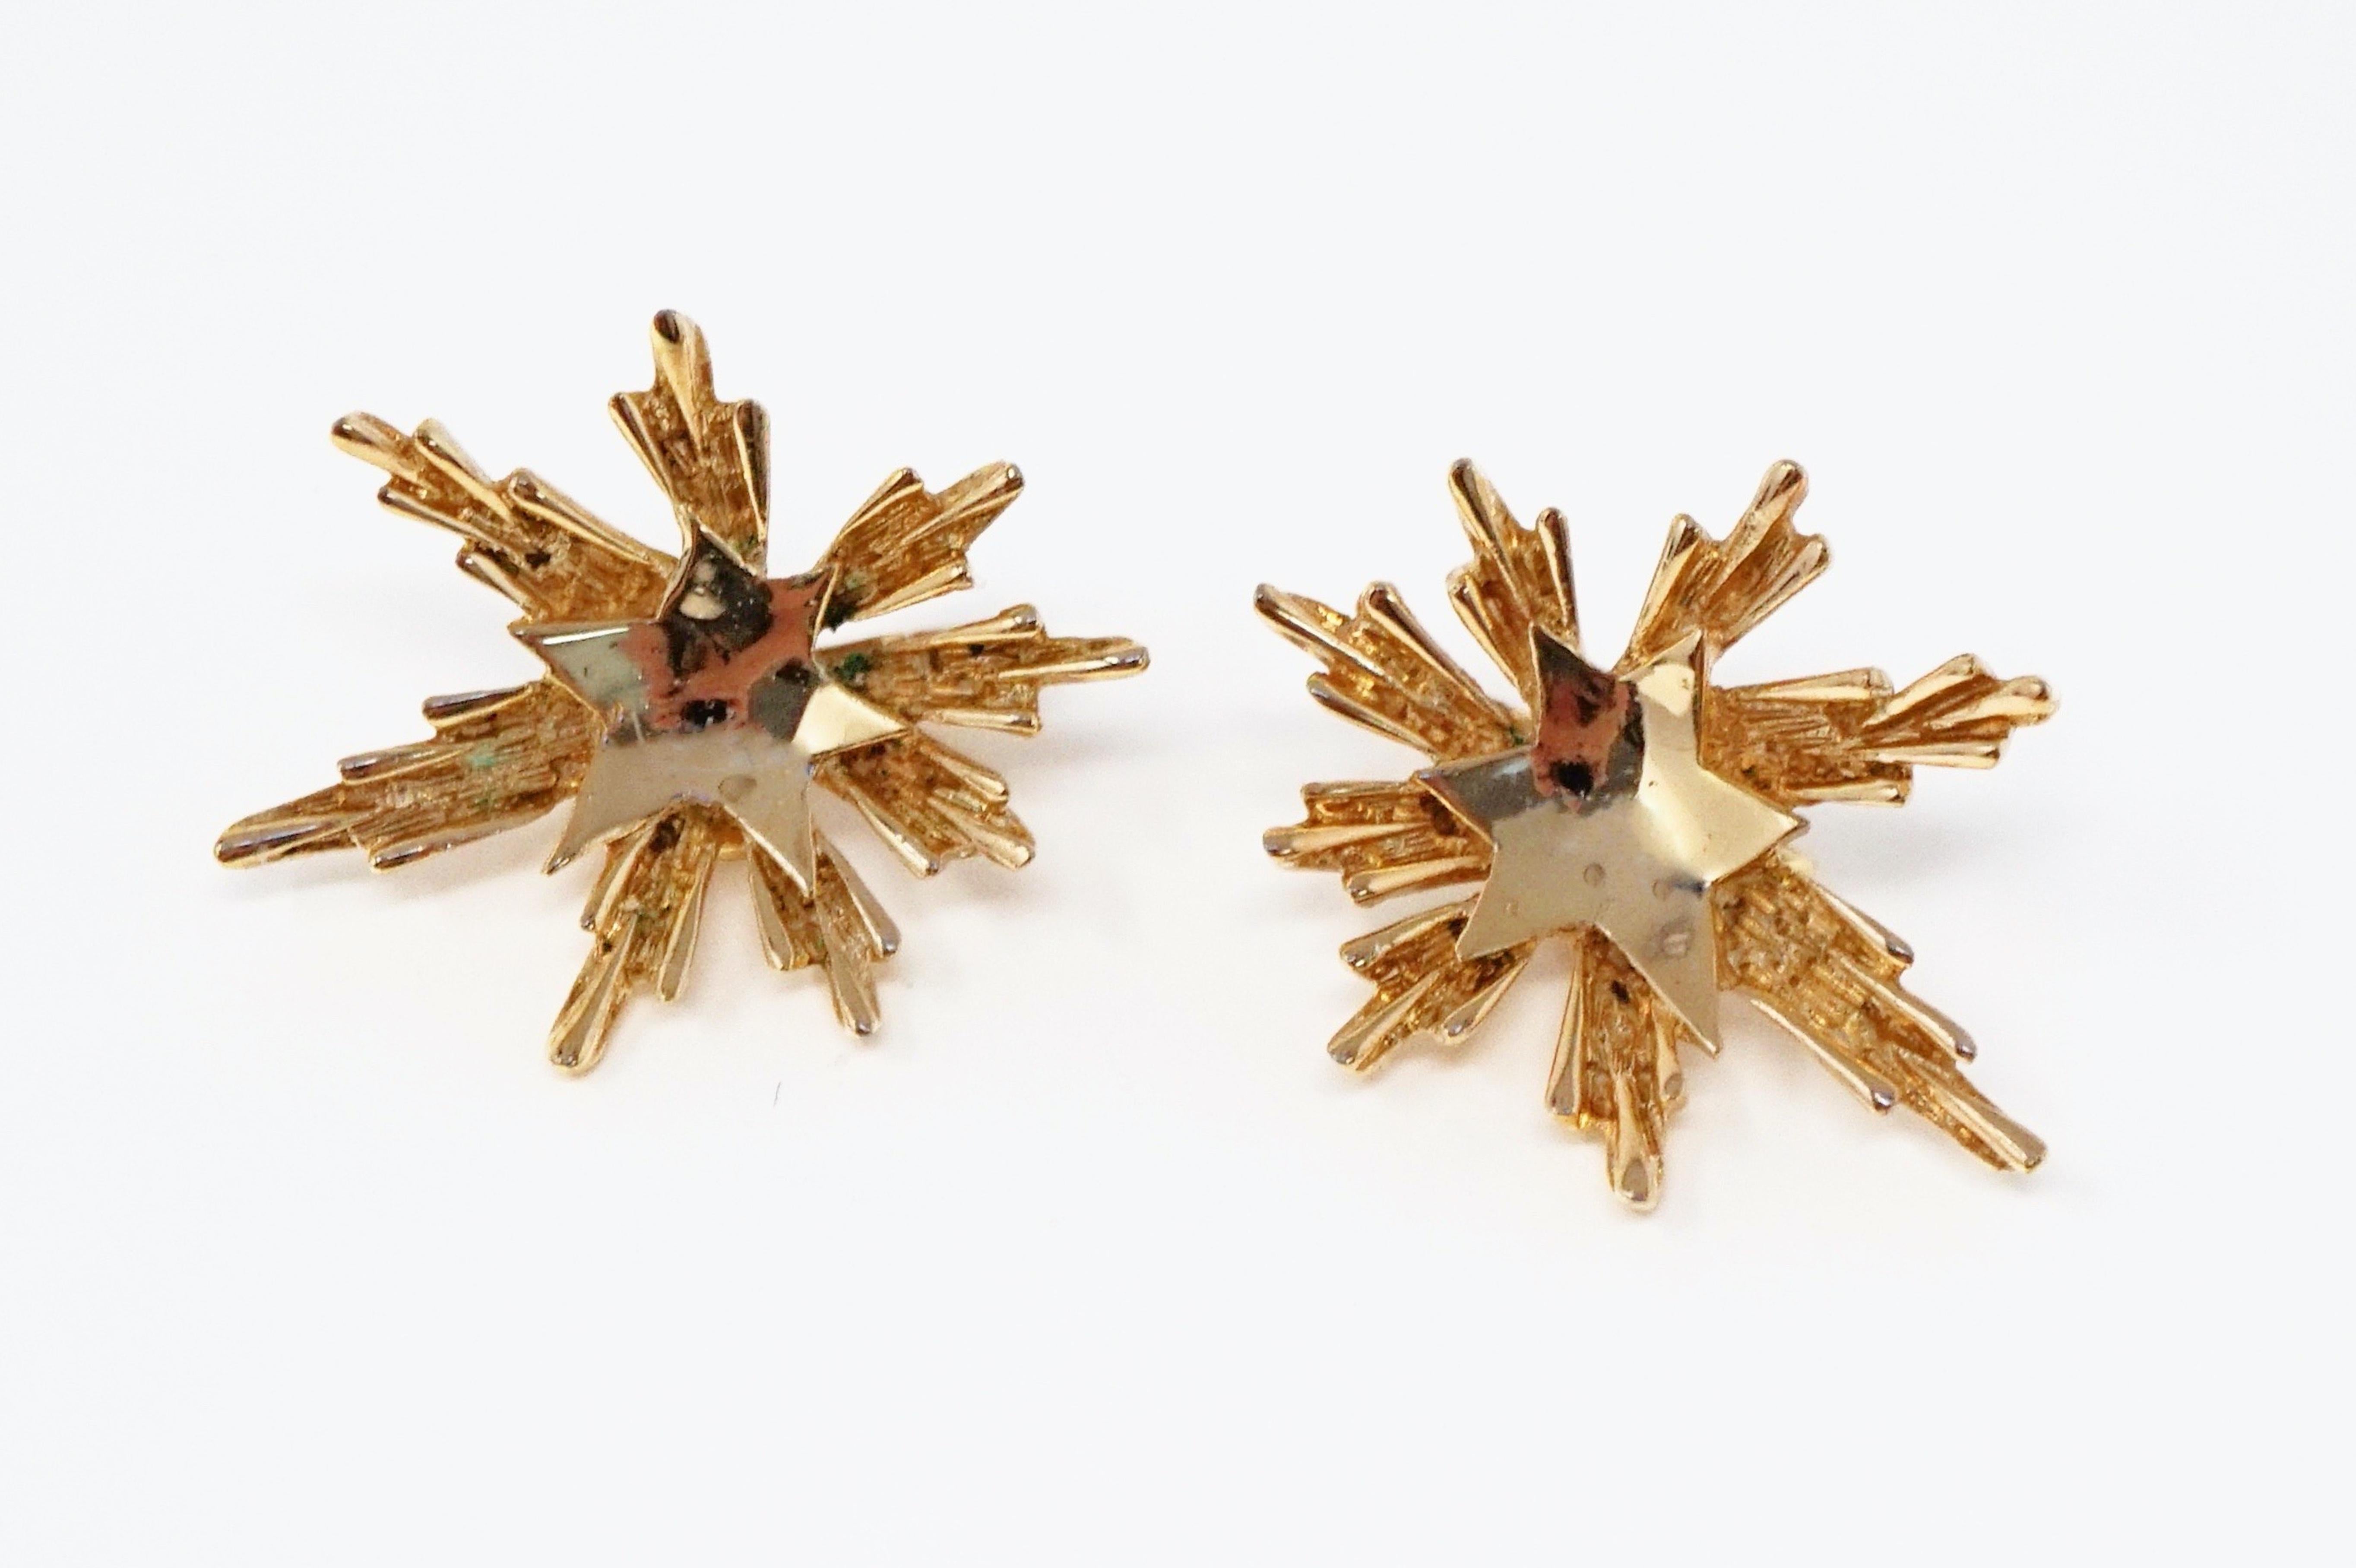 Gorgeous gold-plated clip-on earrings by Trifari, circa 1950s. Trifari is a highly collected costume jewelry brand, noted for its quality and intricate details. These mid-century modern examples were produced during the Crown Trifari period of 1955